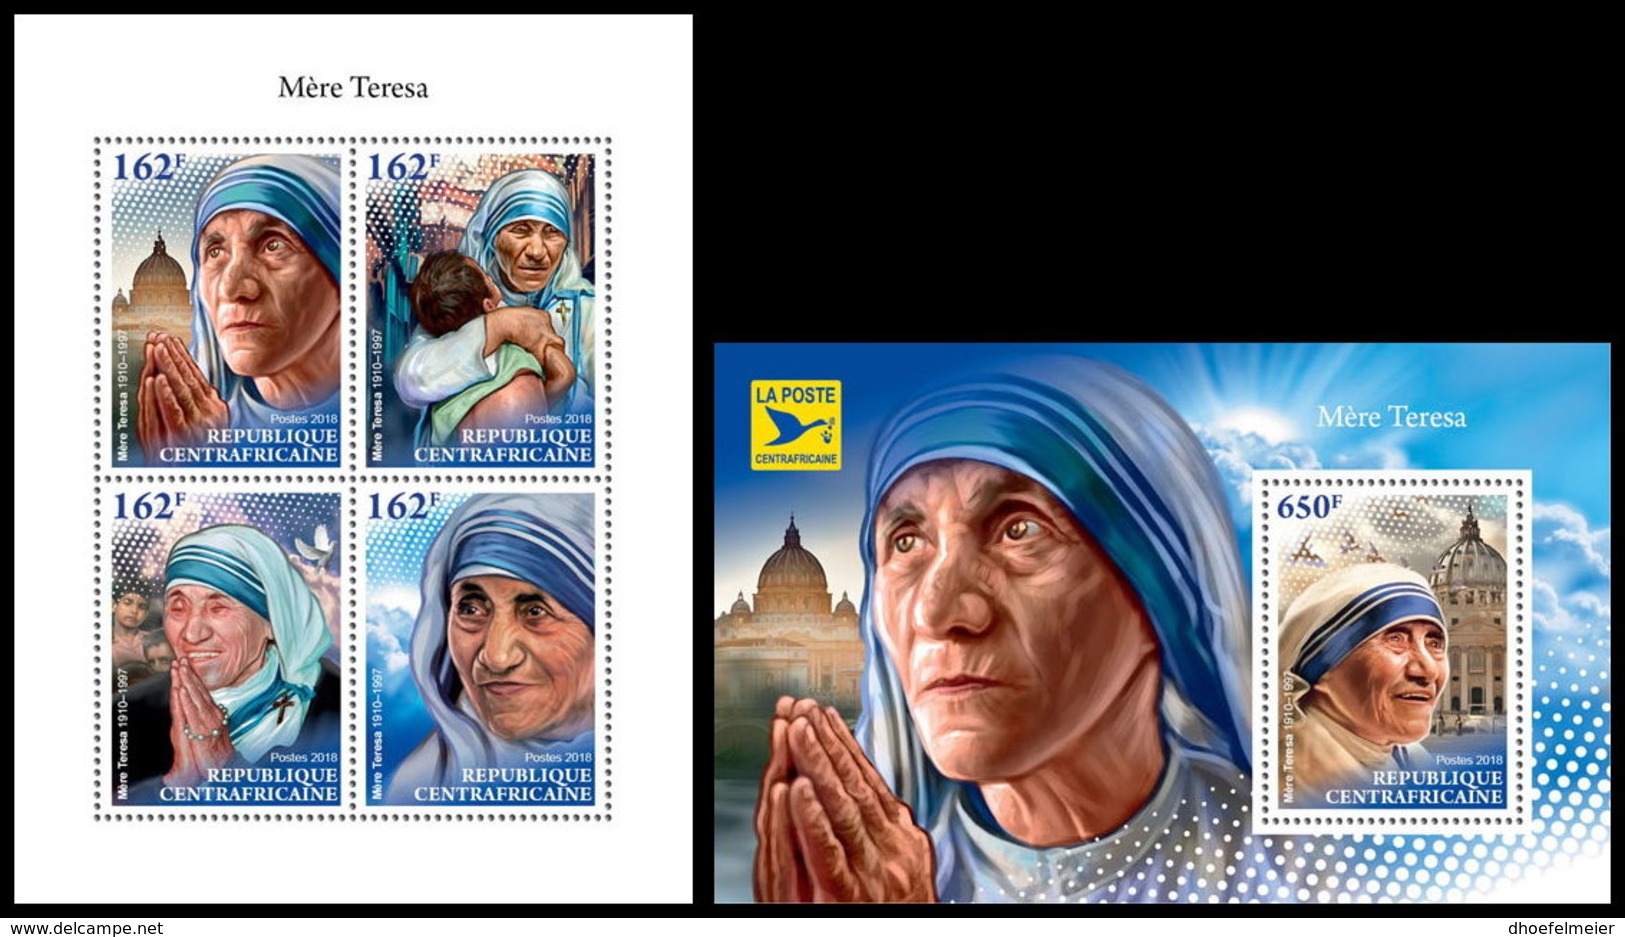 CENTRAL AFRICA 2018 **MNH SMALL Mother Teresa Mutter Teresa Mere Teresa M/S+S/S - OFFICIAL ISSUE - DH1845 - Mother Teresa